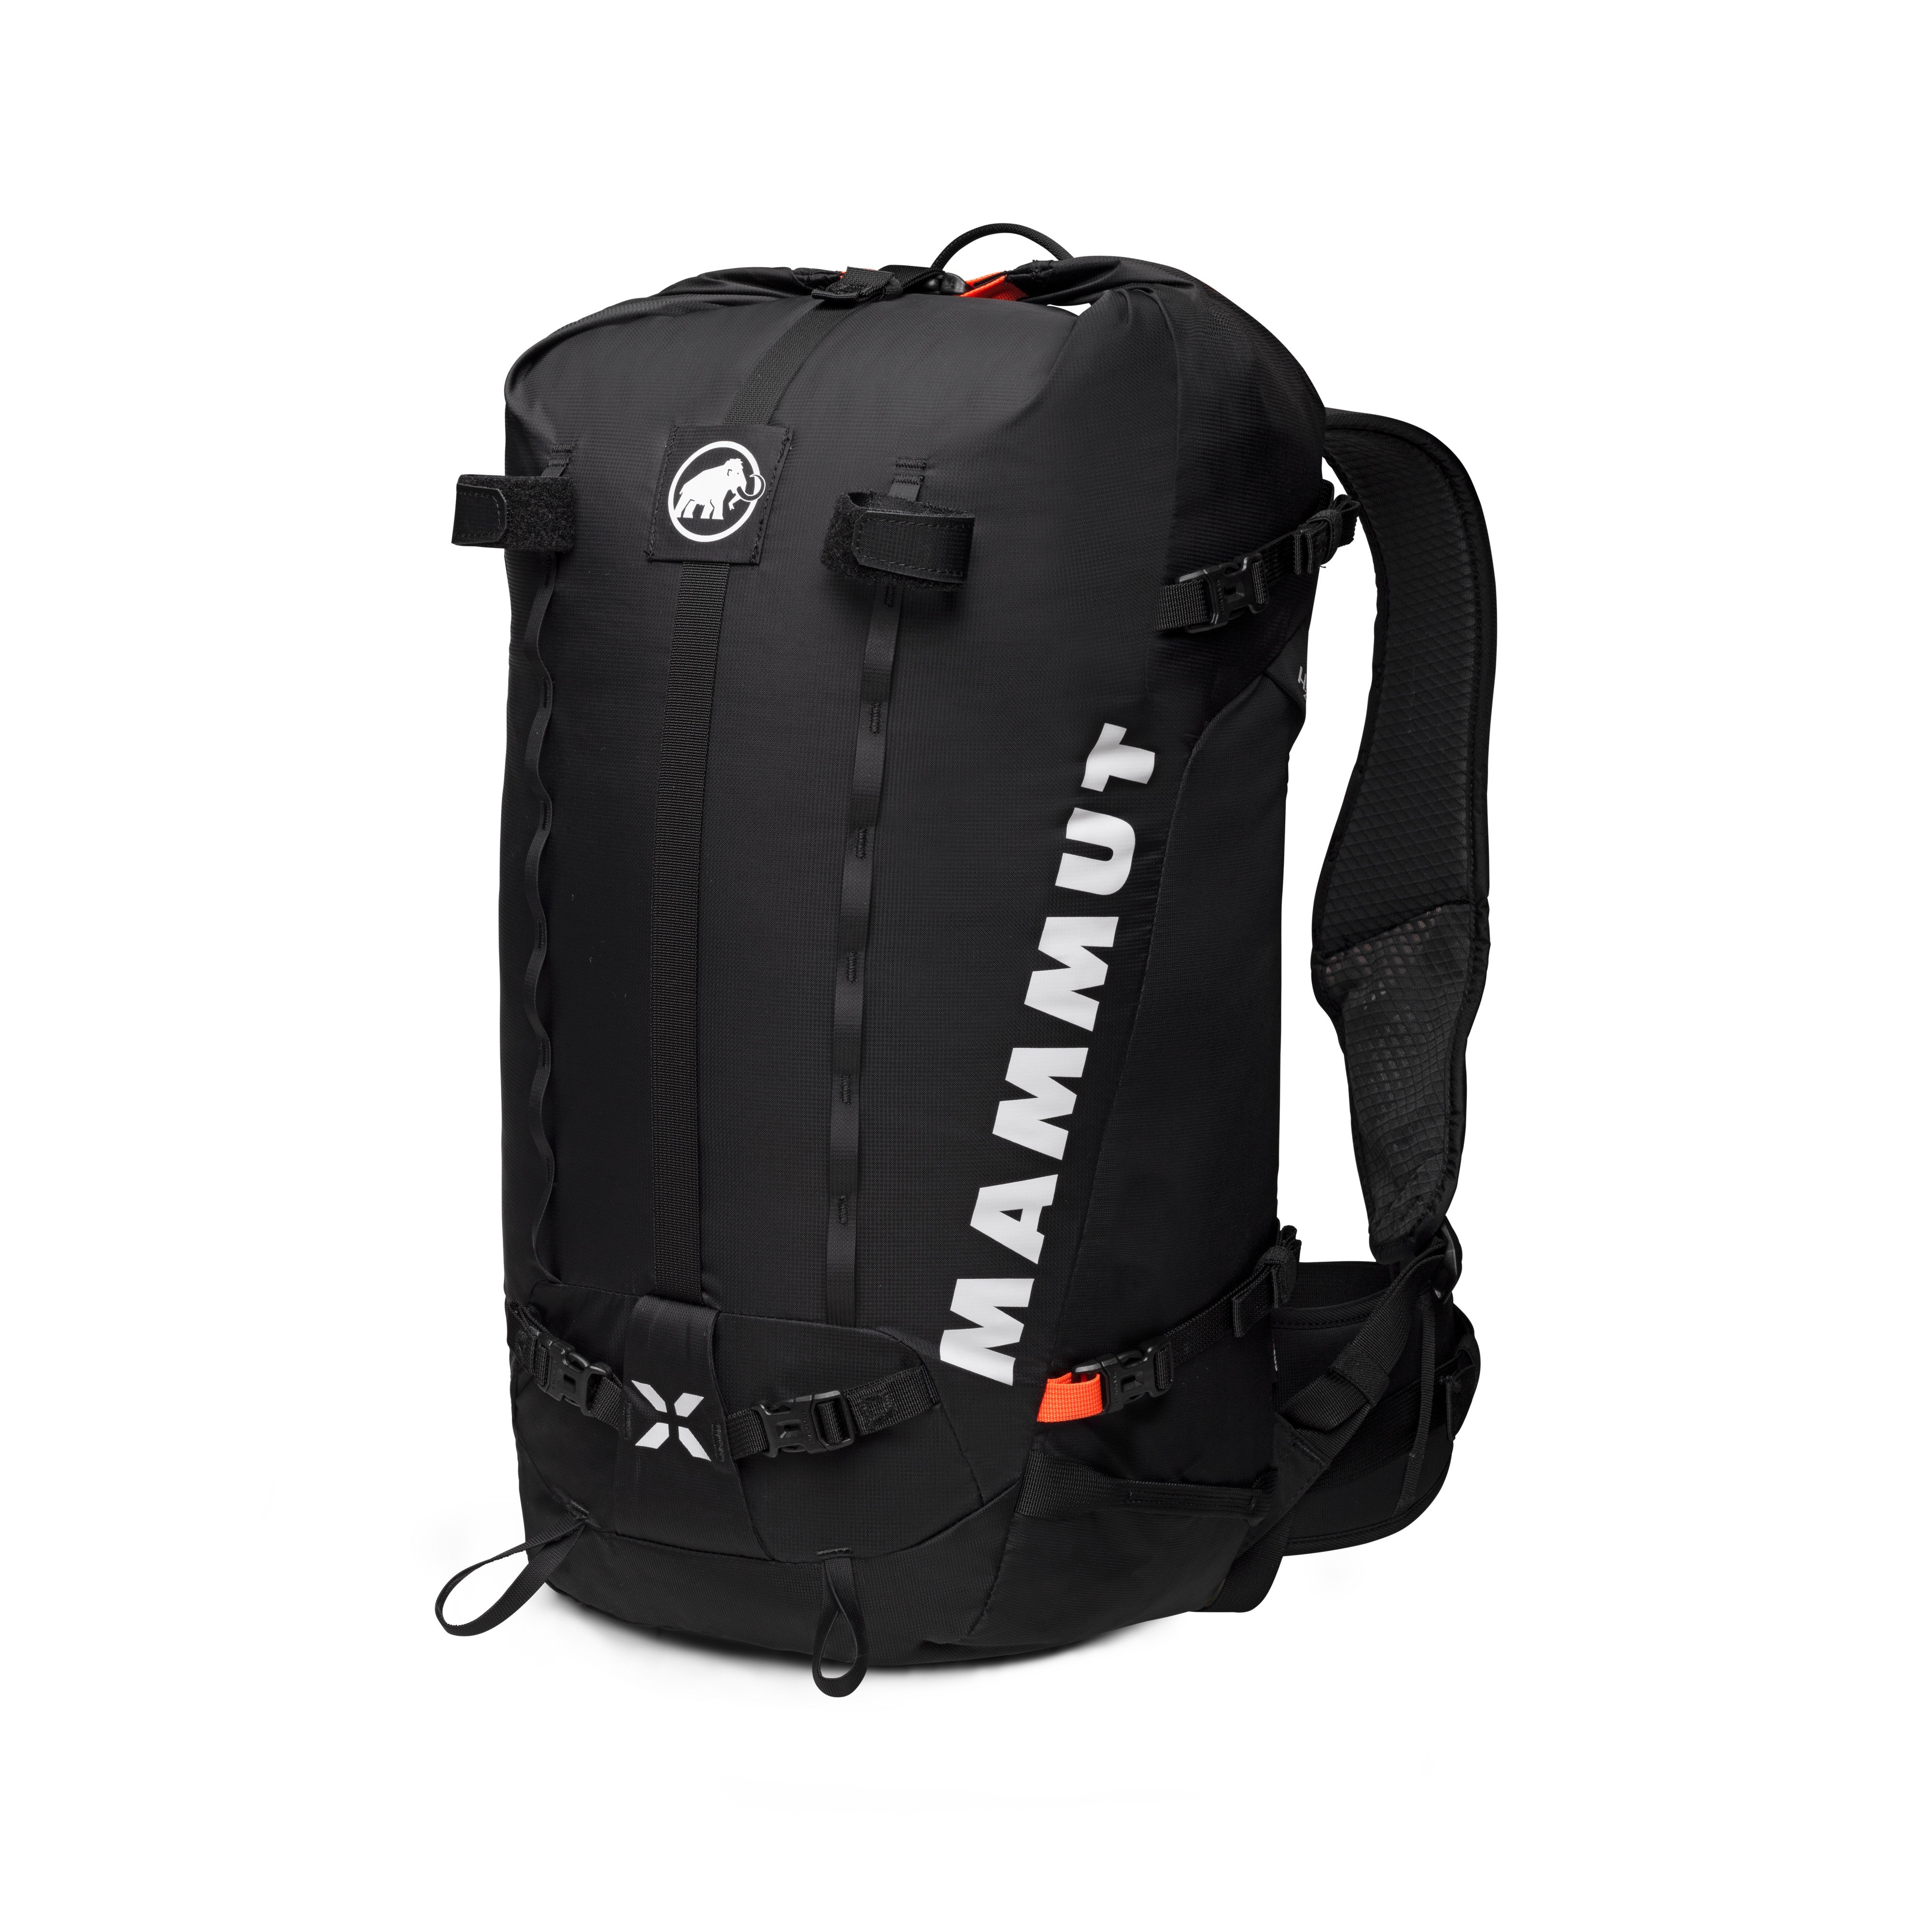 Trion Nordwand 28 - black, 28 L product image